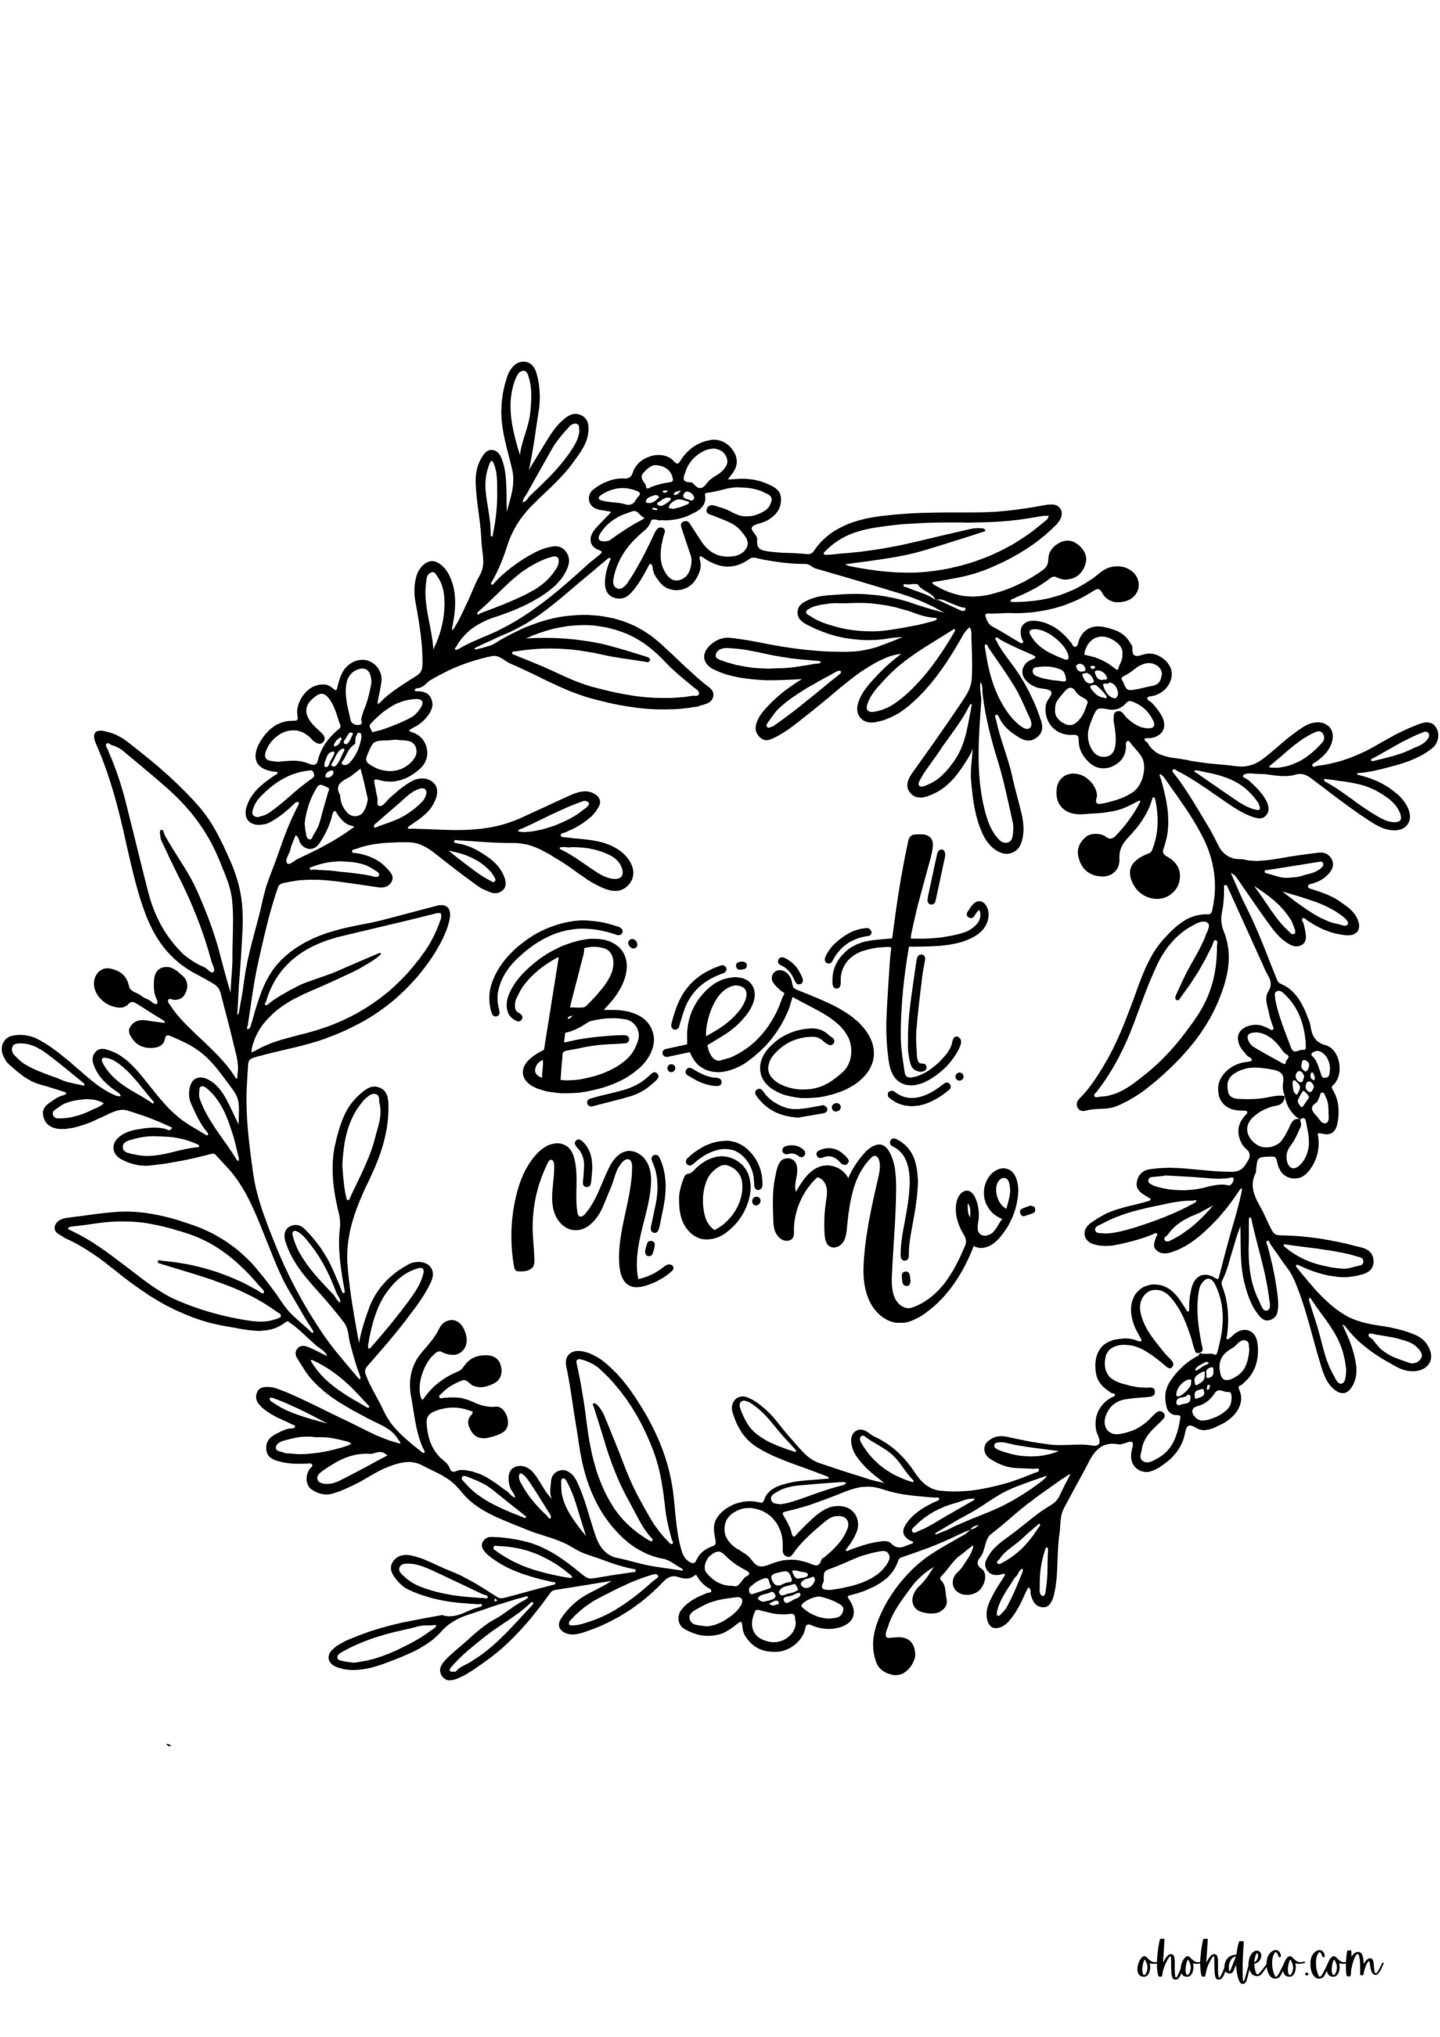 best mom coloring page